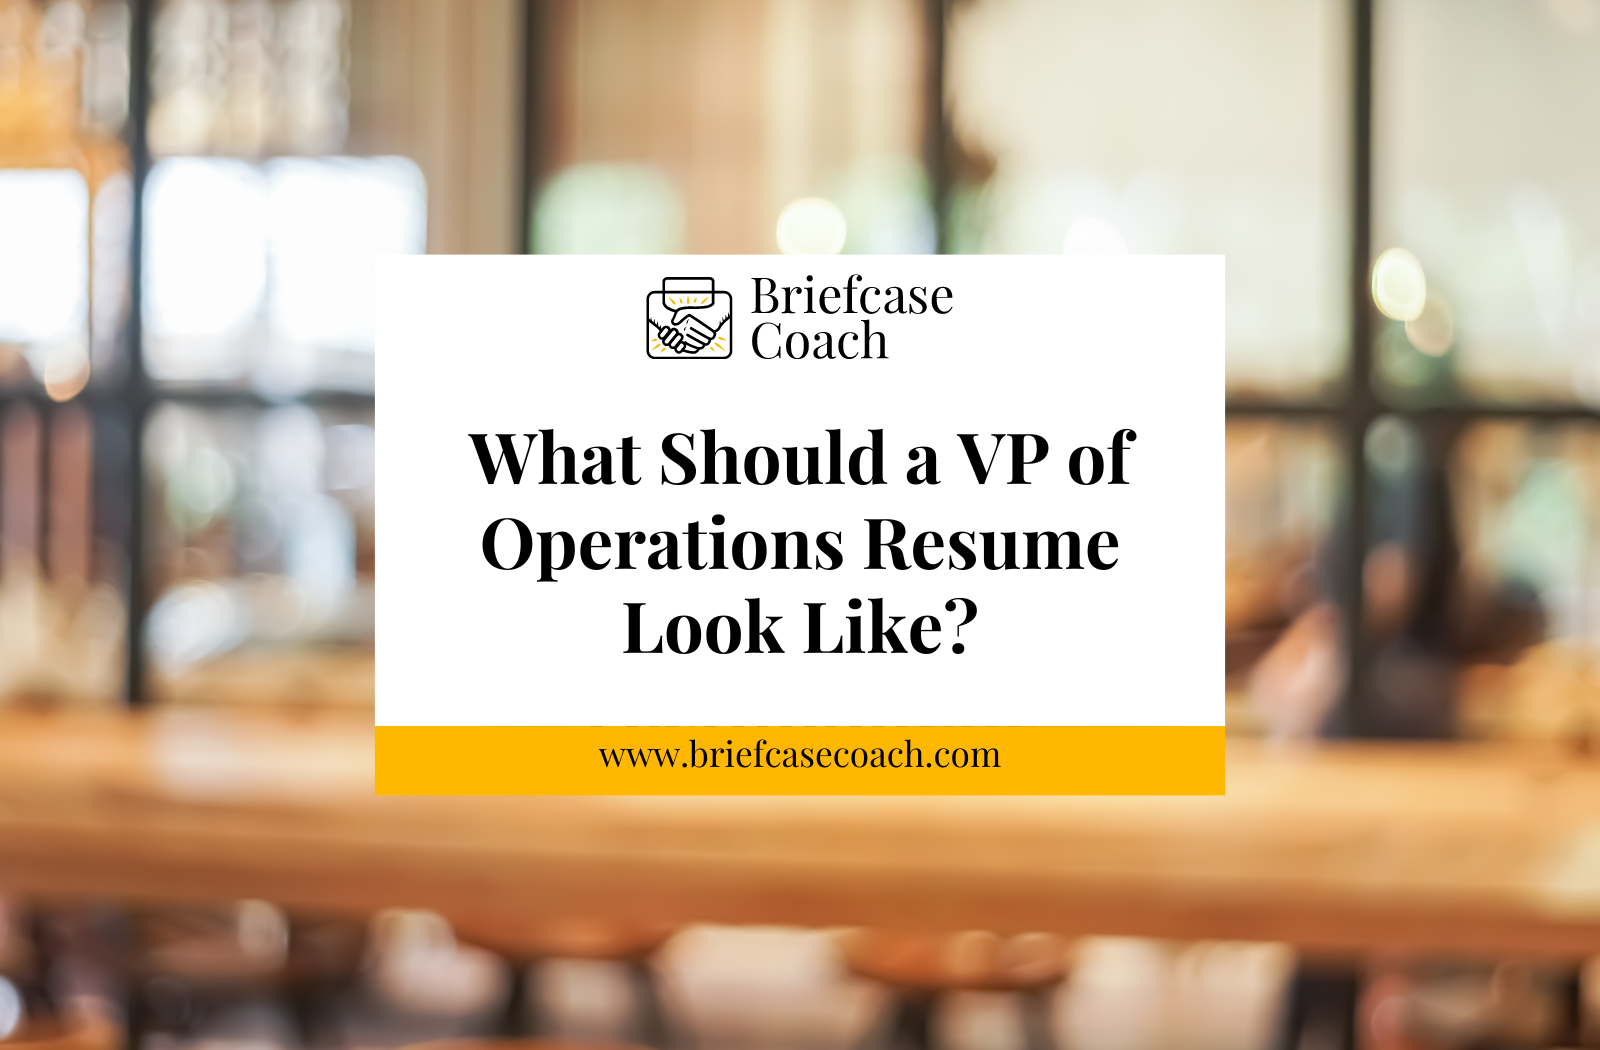 What Should a VP of Operations Resume Look Like?